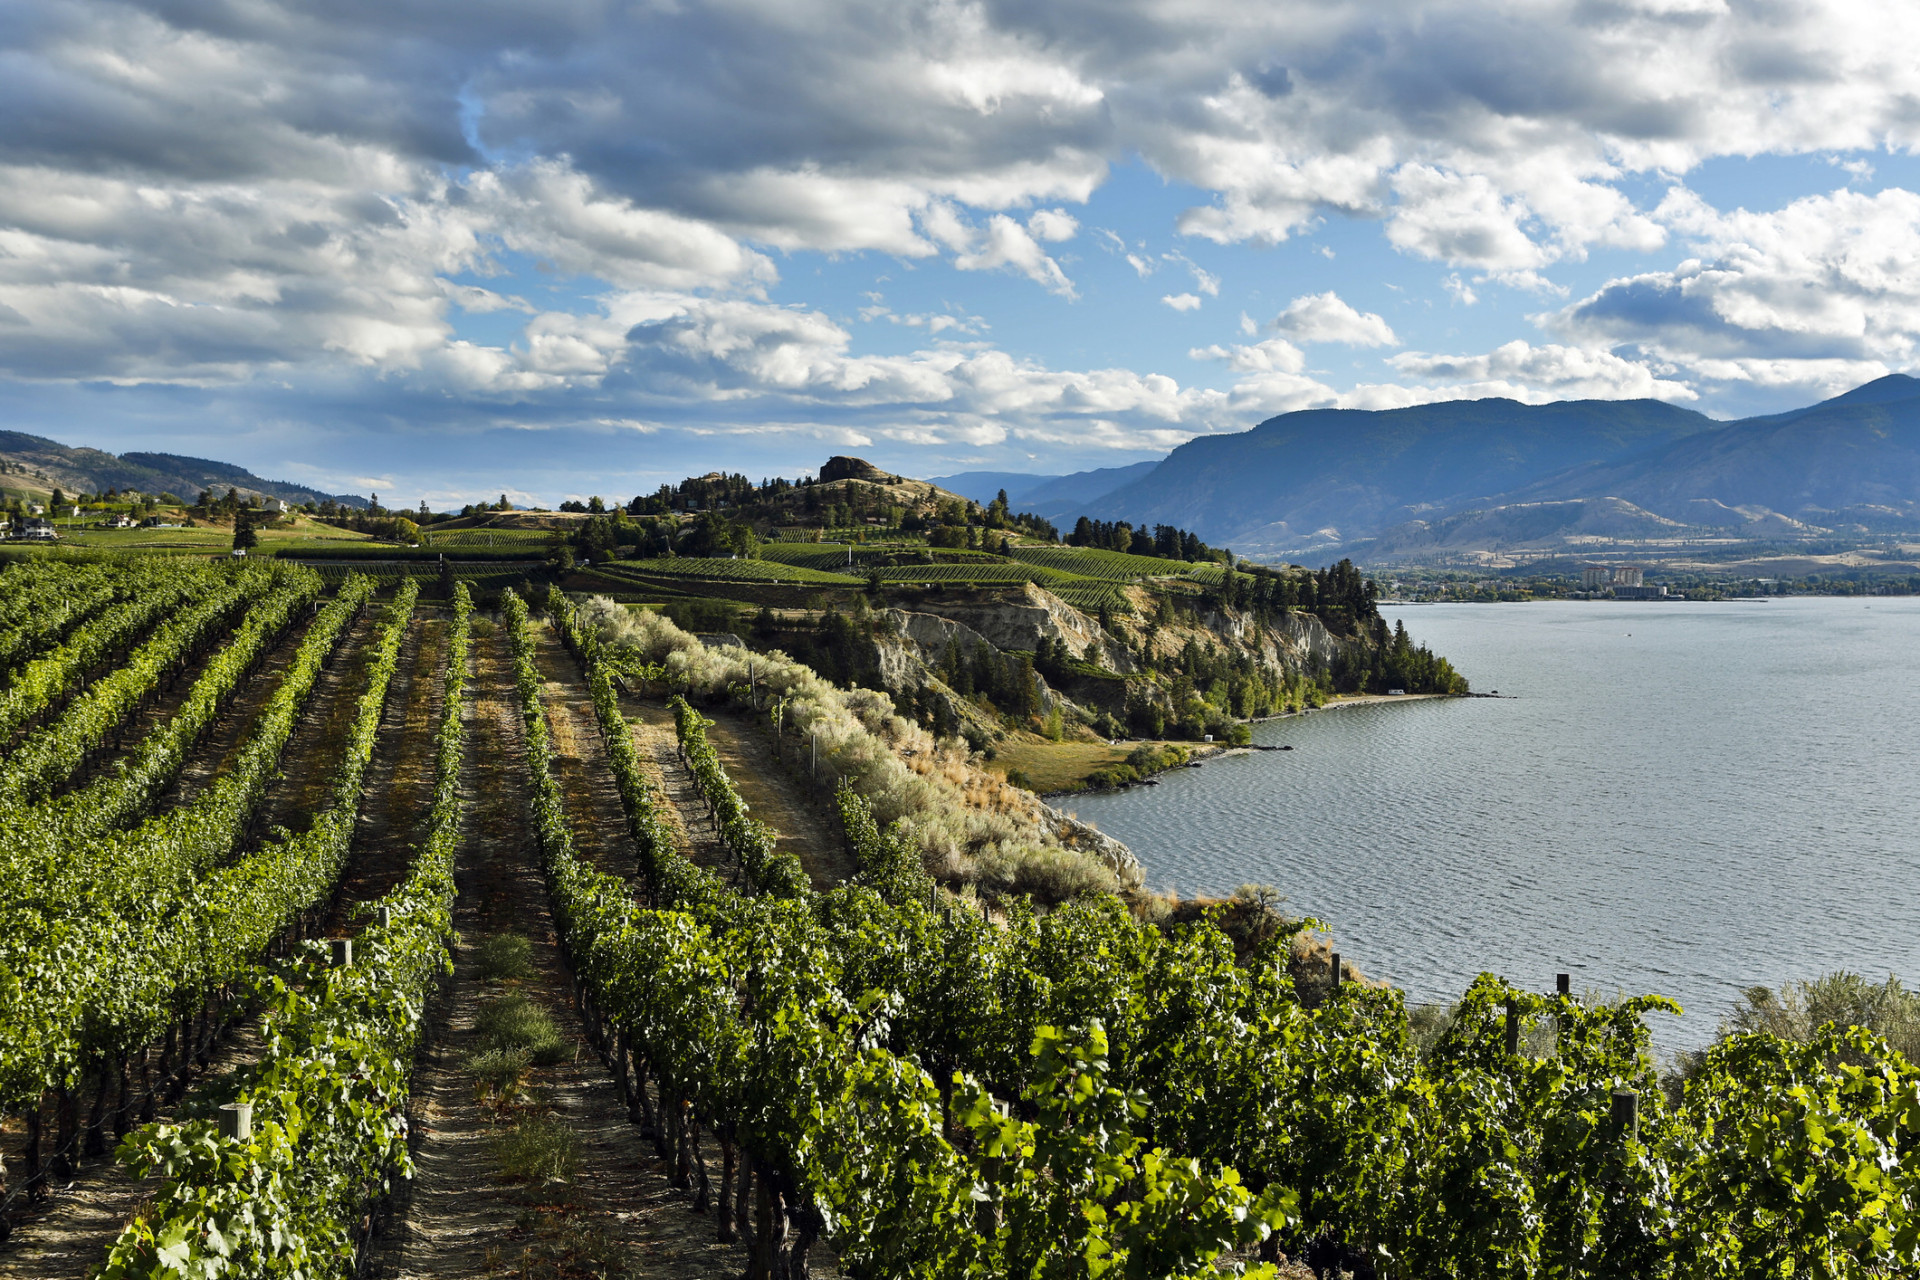 Located in the heart of Okanagan Wine Region, Kelowna is surrounded by parks, forests, mountains, orchards, and, of course, vineyards. <p>You may also like:<a href="https://www.starsinsider.com/n/457560?utm_source=msn.com&utm_medium=display&utm_campaign=referral_description&utm_content=384585v6en-us"> The worst royal fashion faux pas moments</a></p>